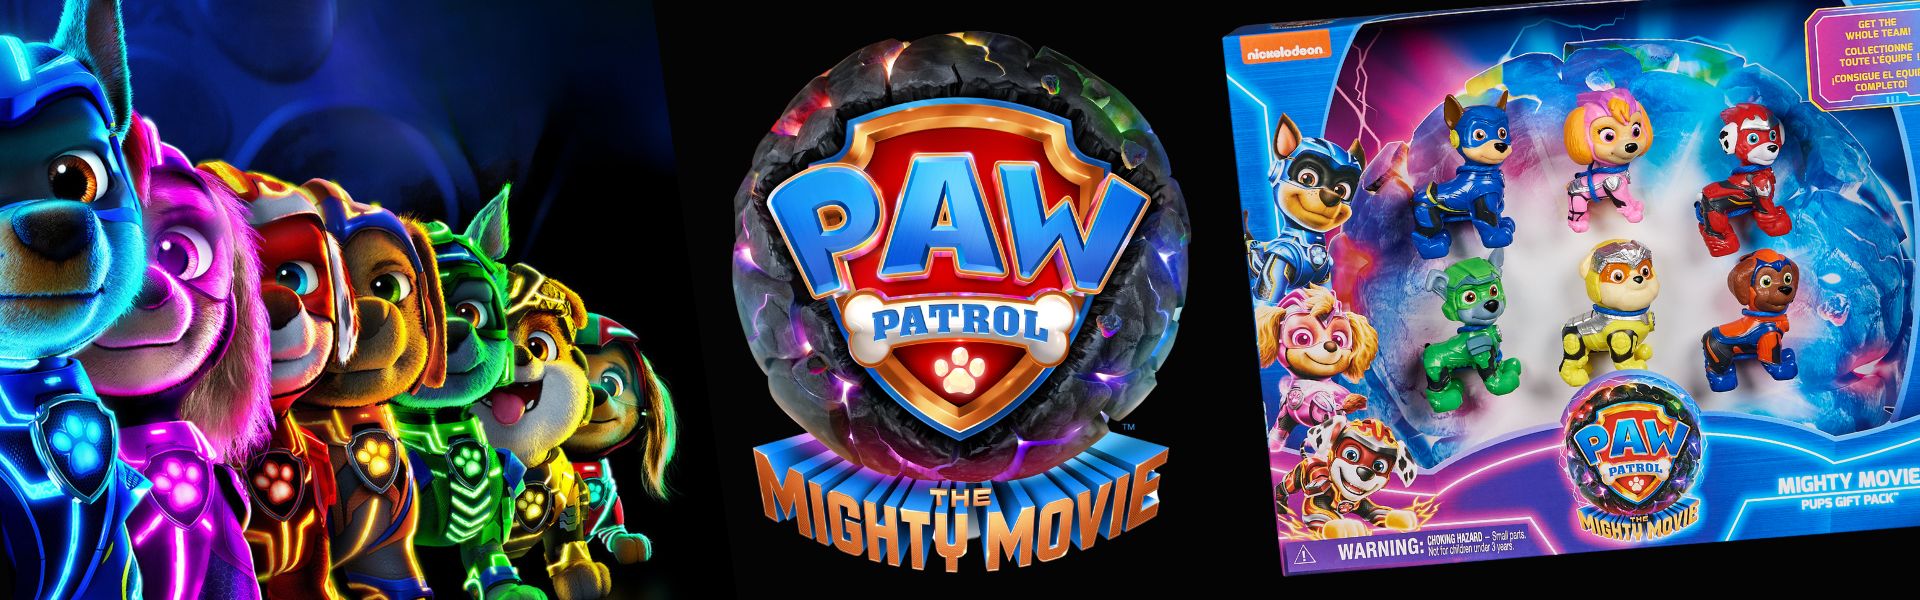 Unleash your creativity in our Paw Patrol Giveaway! Copy